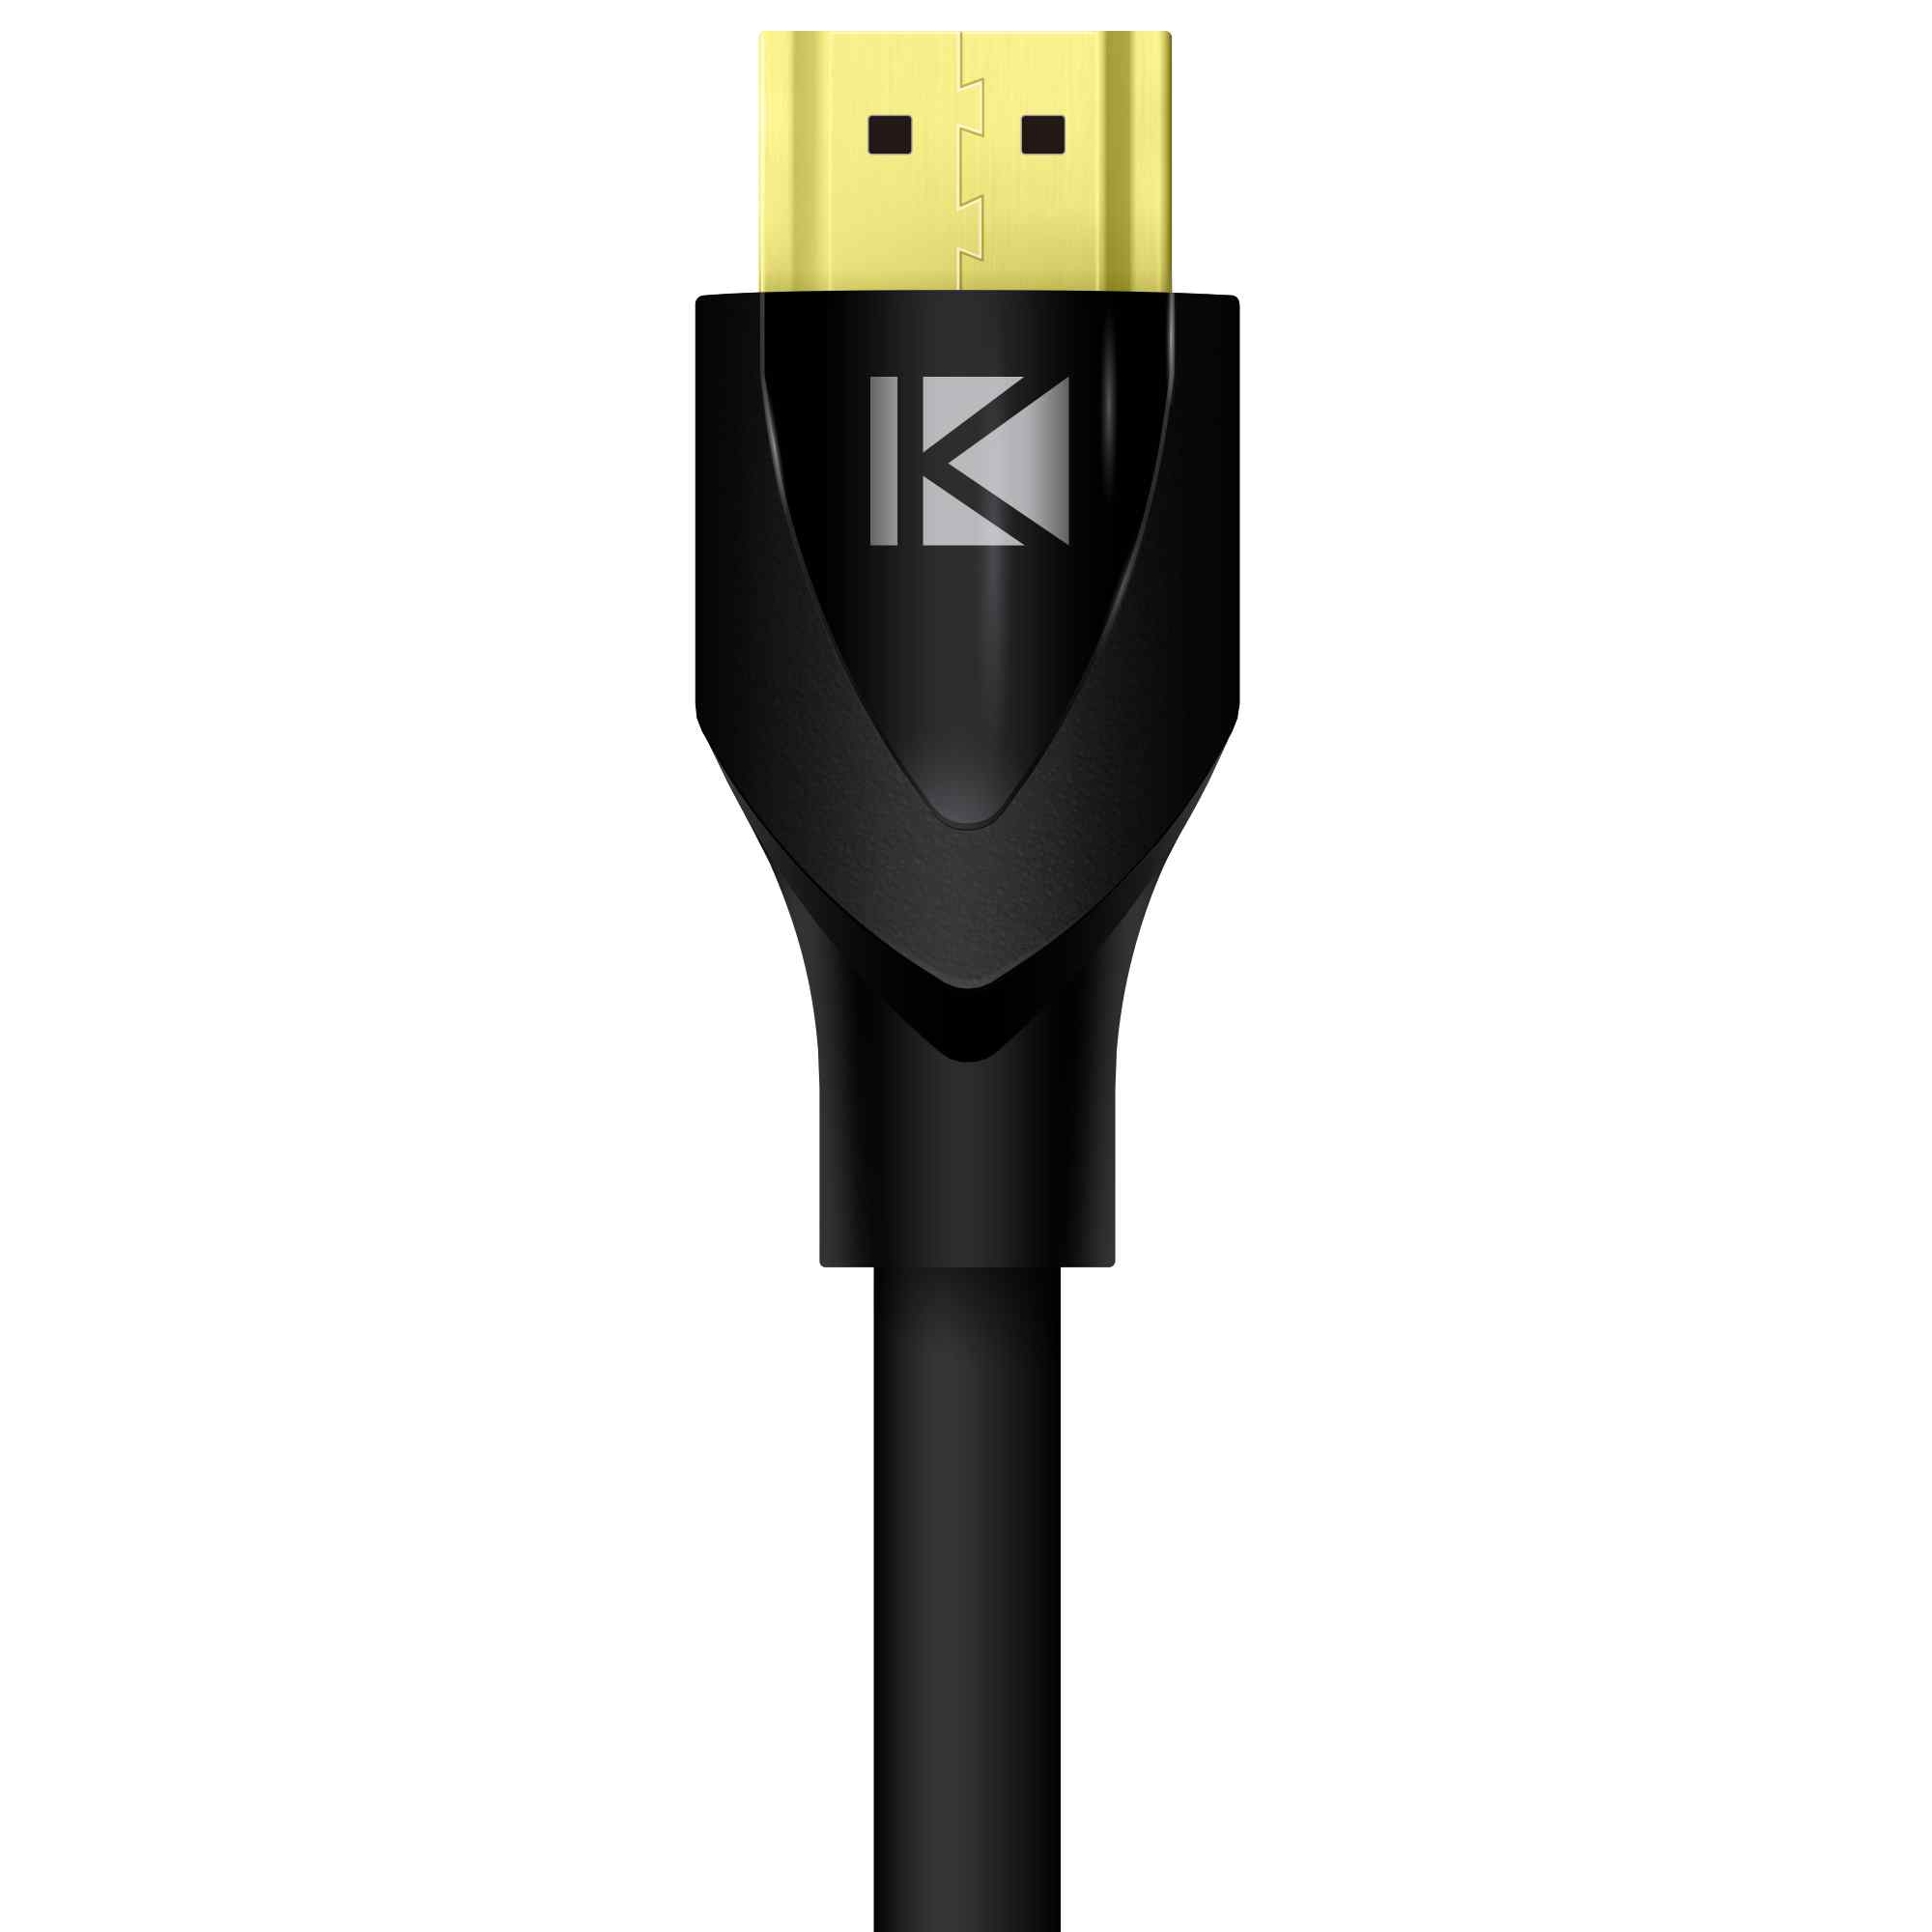 Thumbnail of Key Digital hdmi high speed cable Rear View